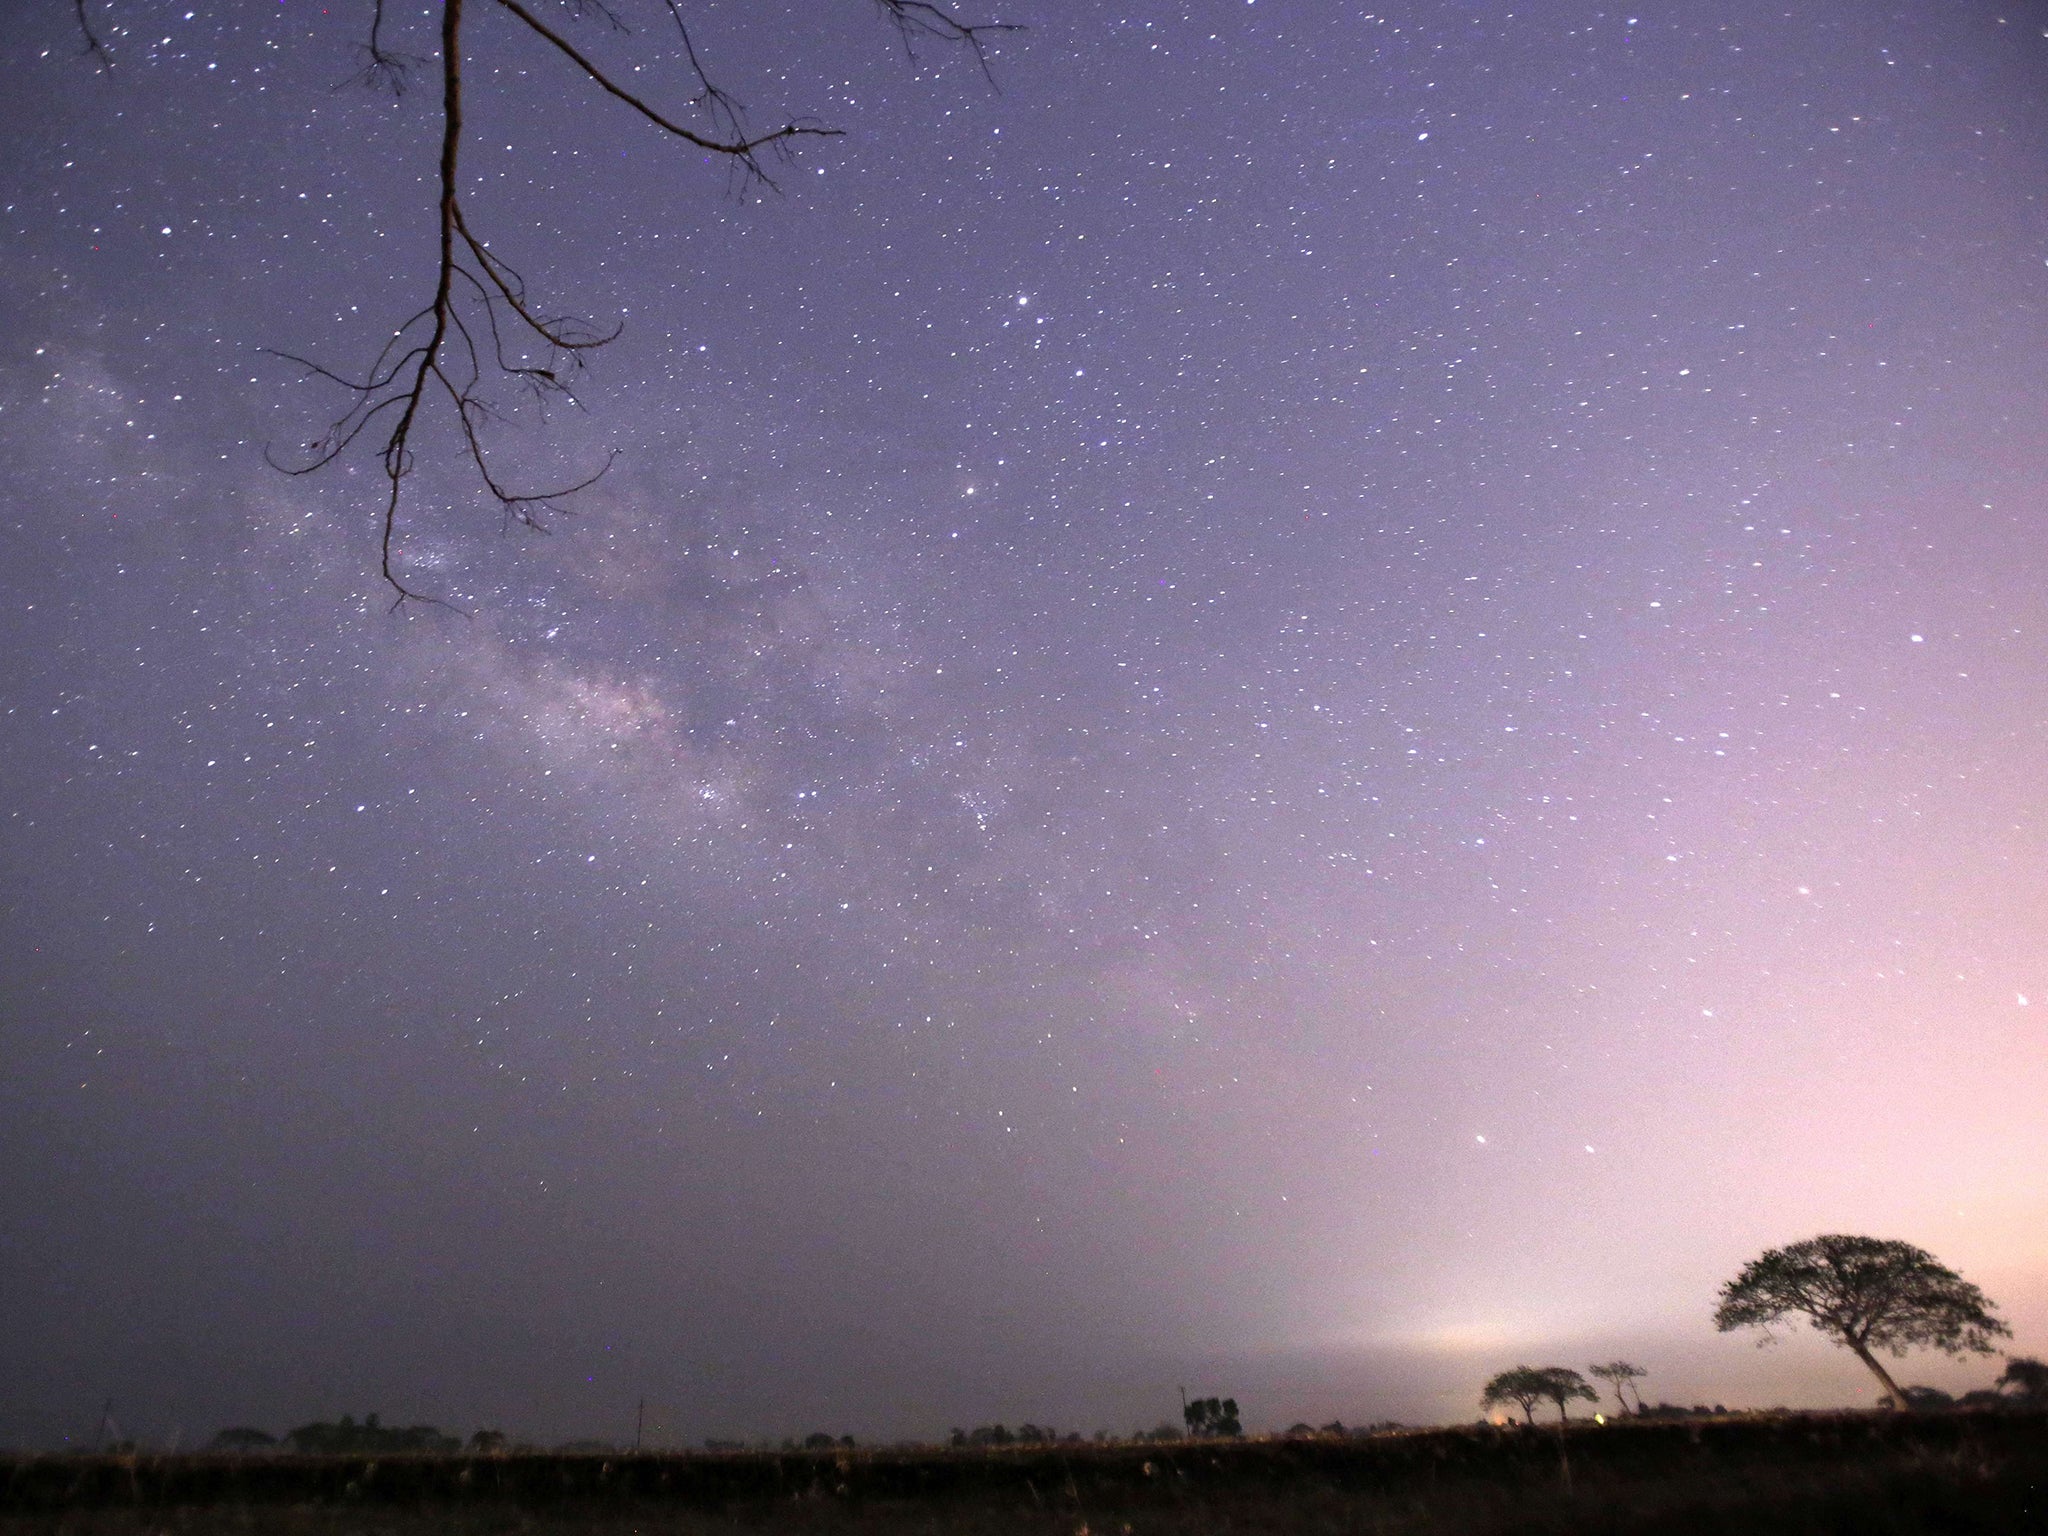 The Lyrids meteor shower passing near the Milky Way in the clear night sky of Thanlyin, Myanmar